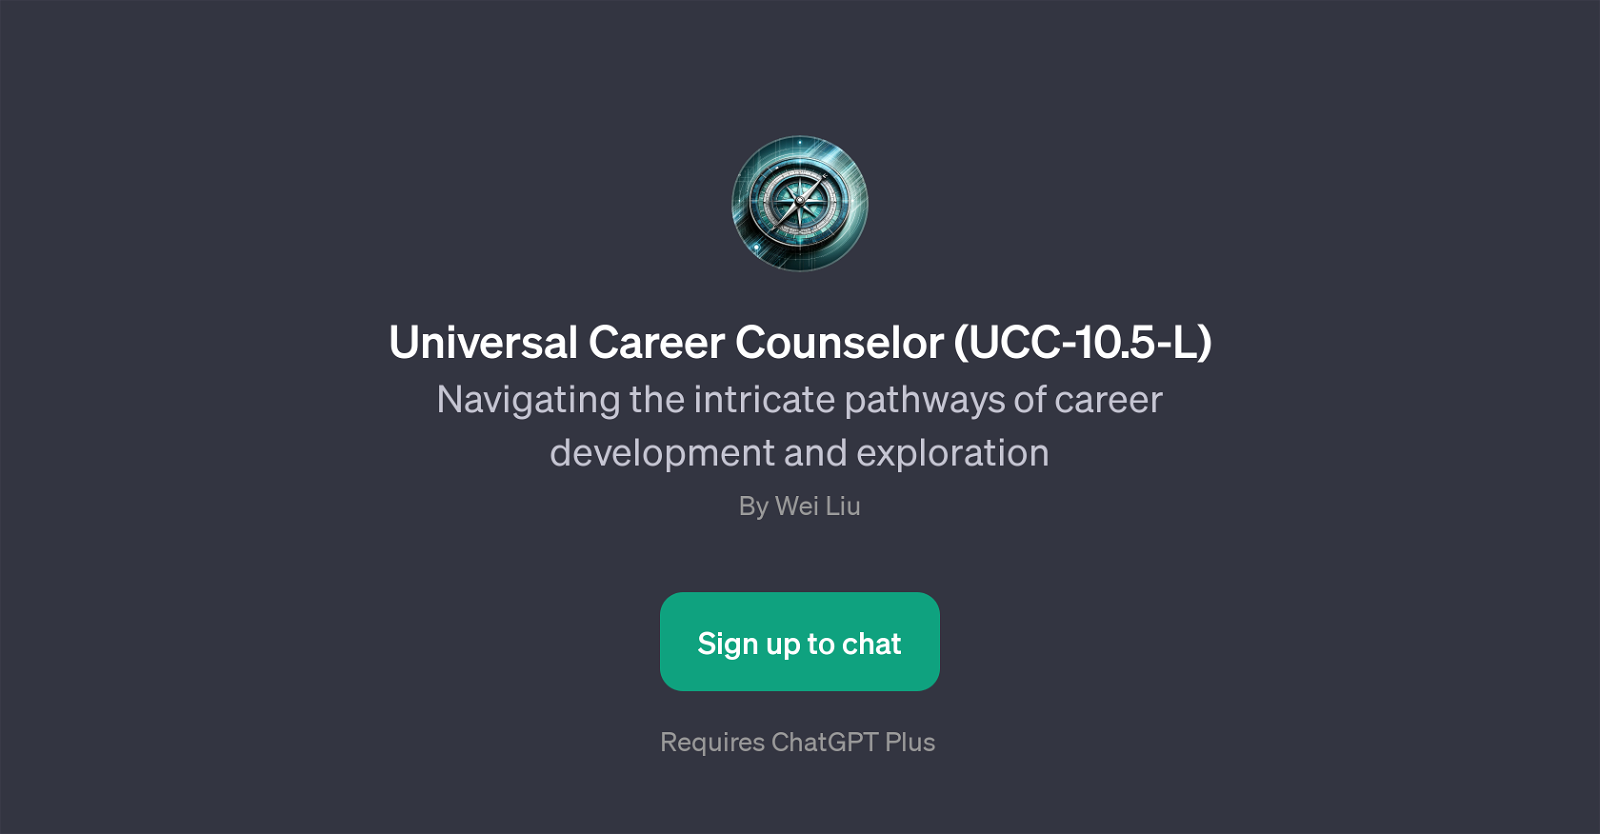 Universal Career Counselor (UCC-10.5-L) website